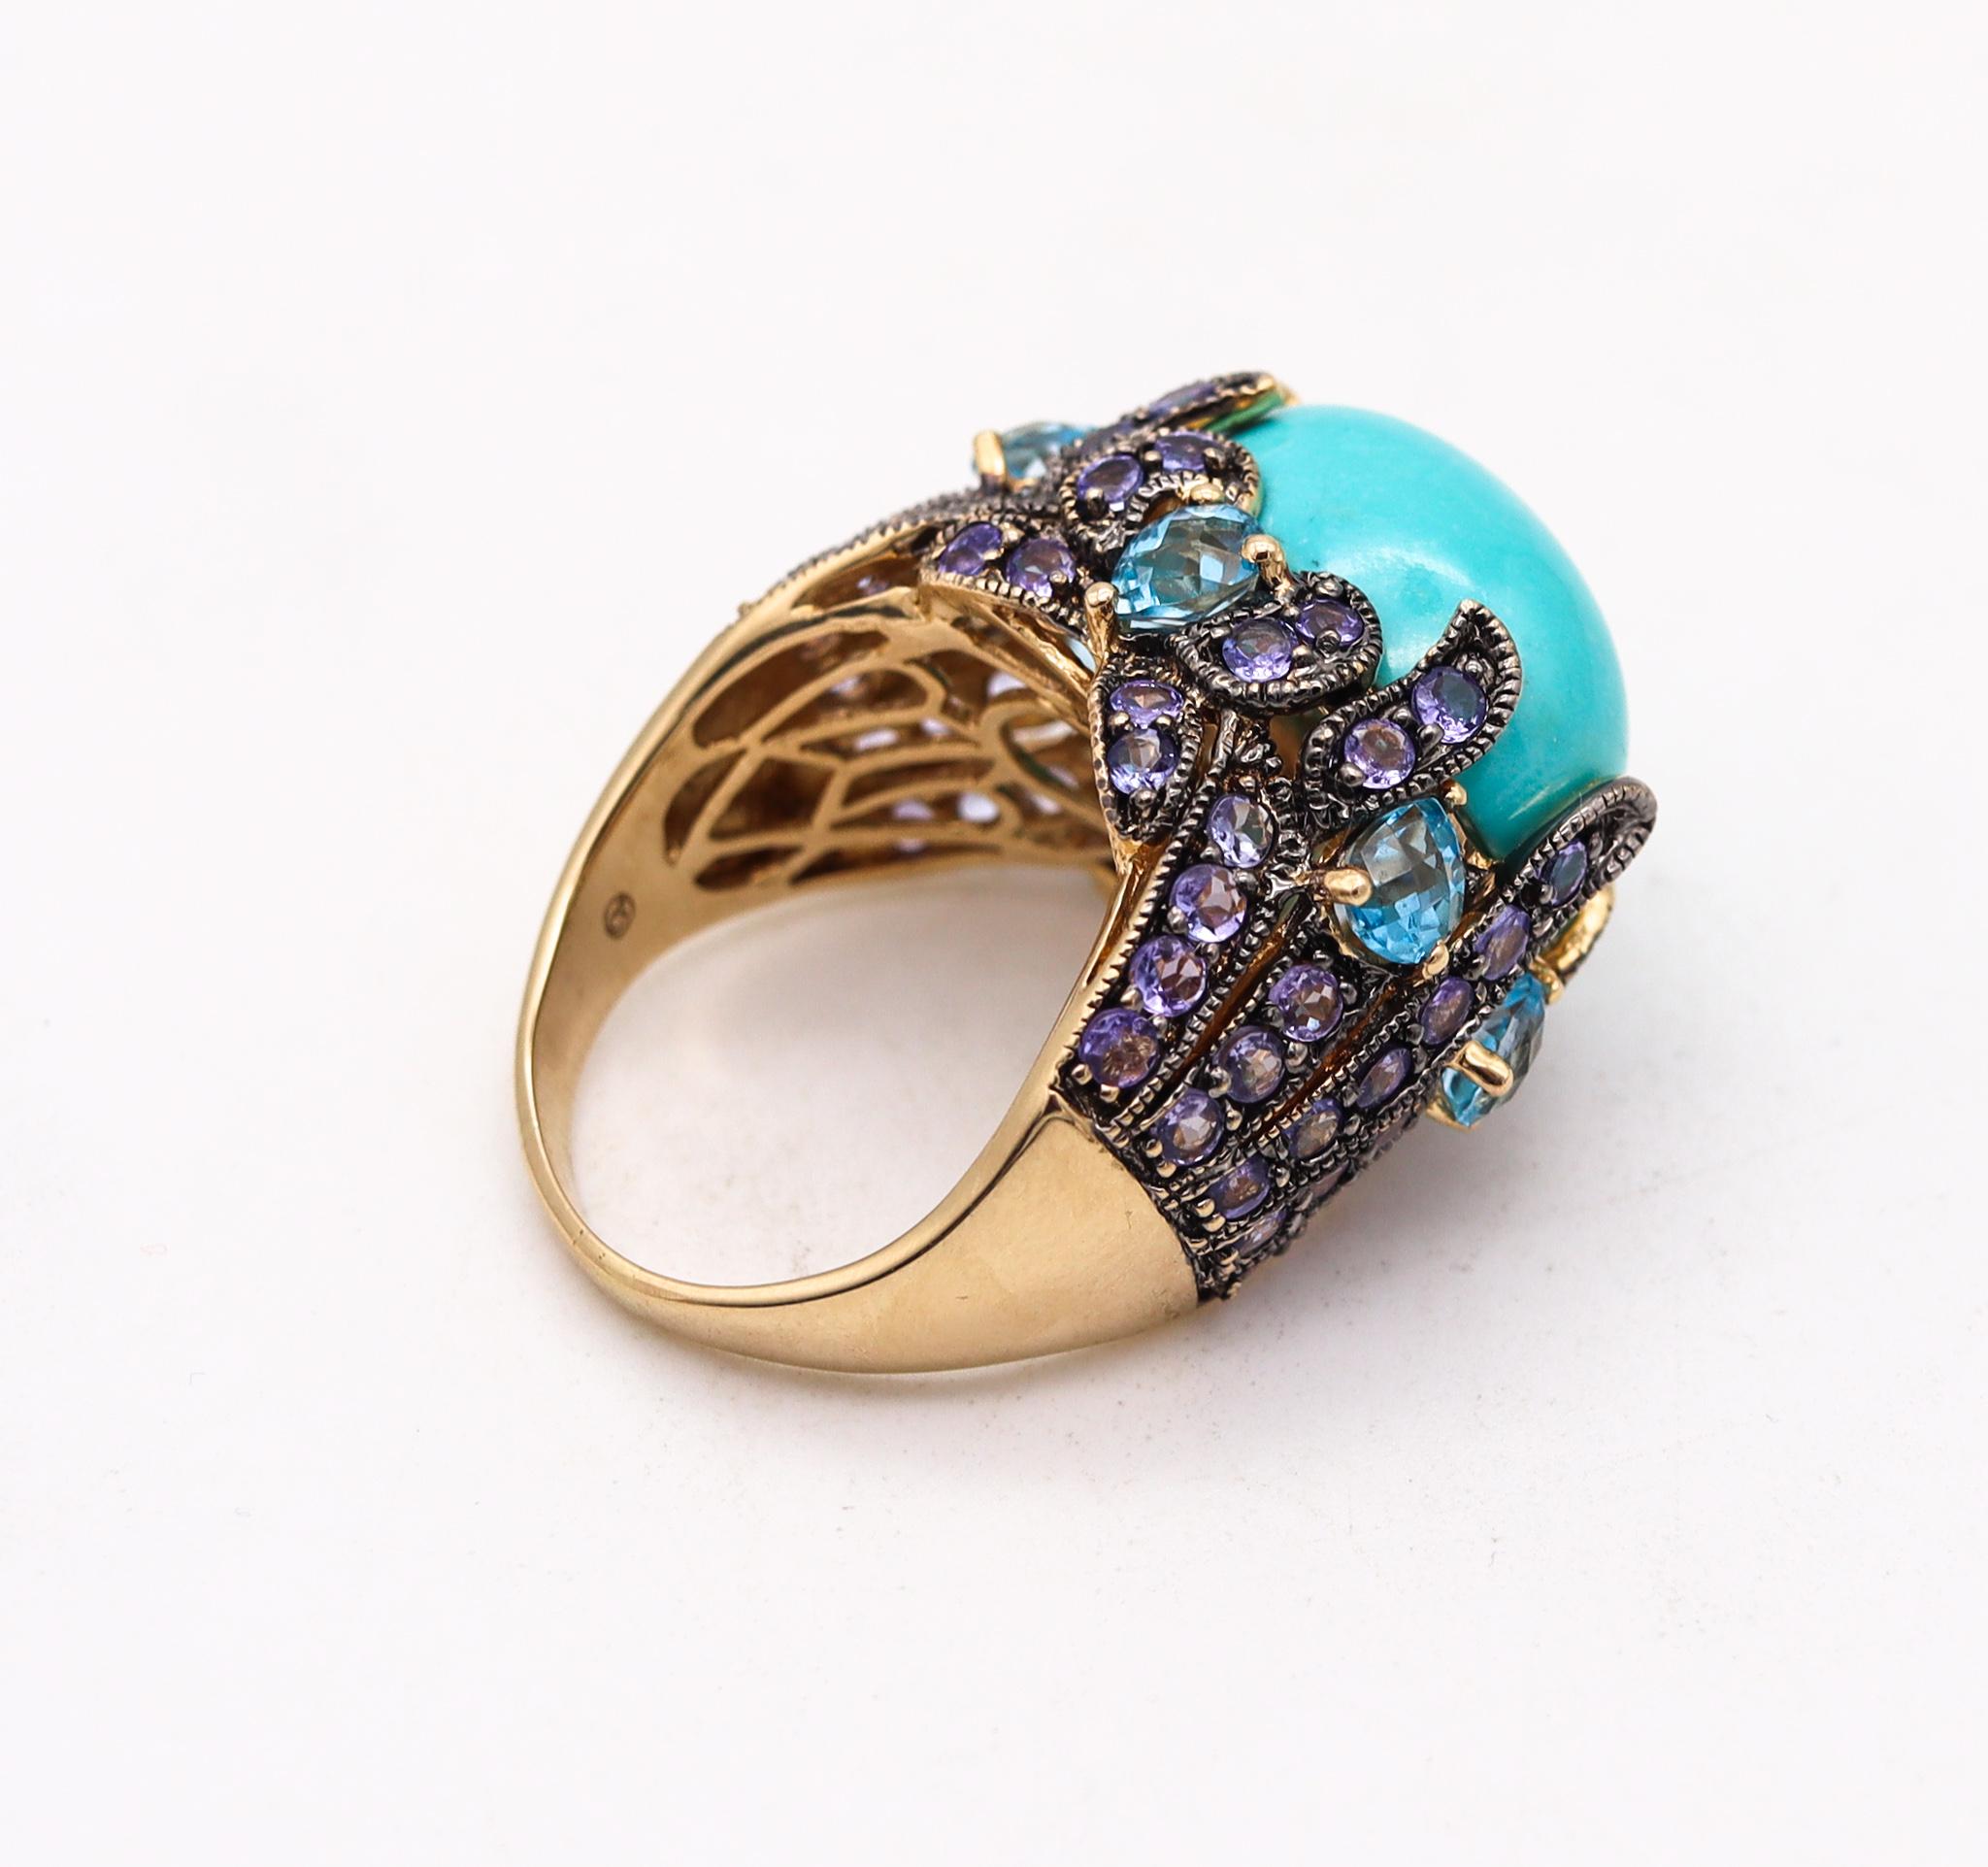 Mixed Cut Carlo Viani Turquoise Cocktail Ring in 18Kt Gold with 26.64 Cts Iolites & Topaz